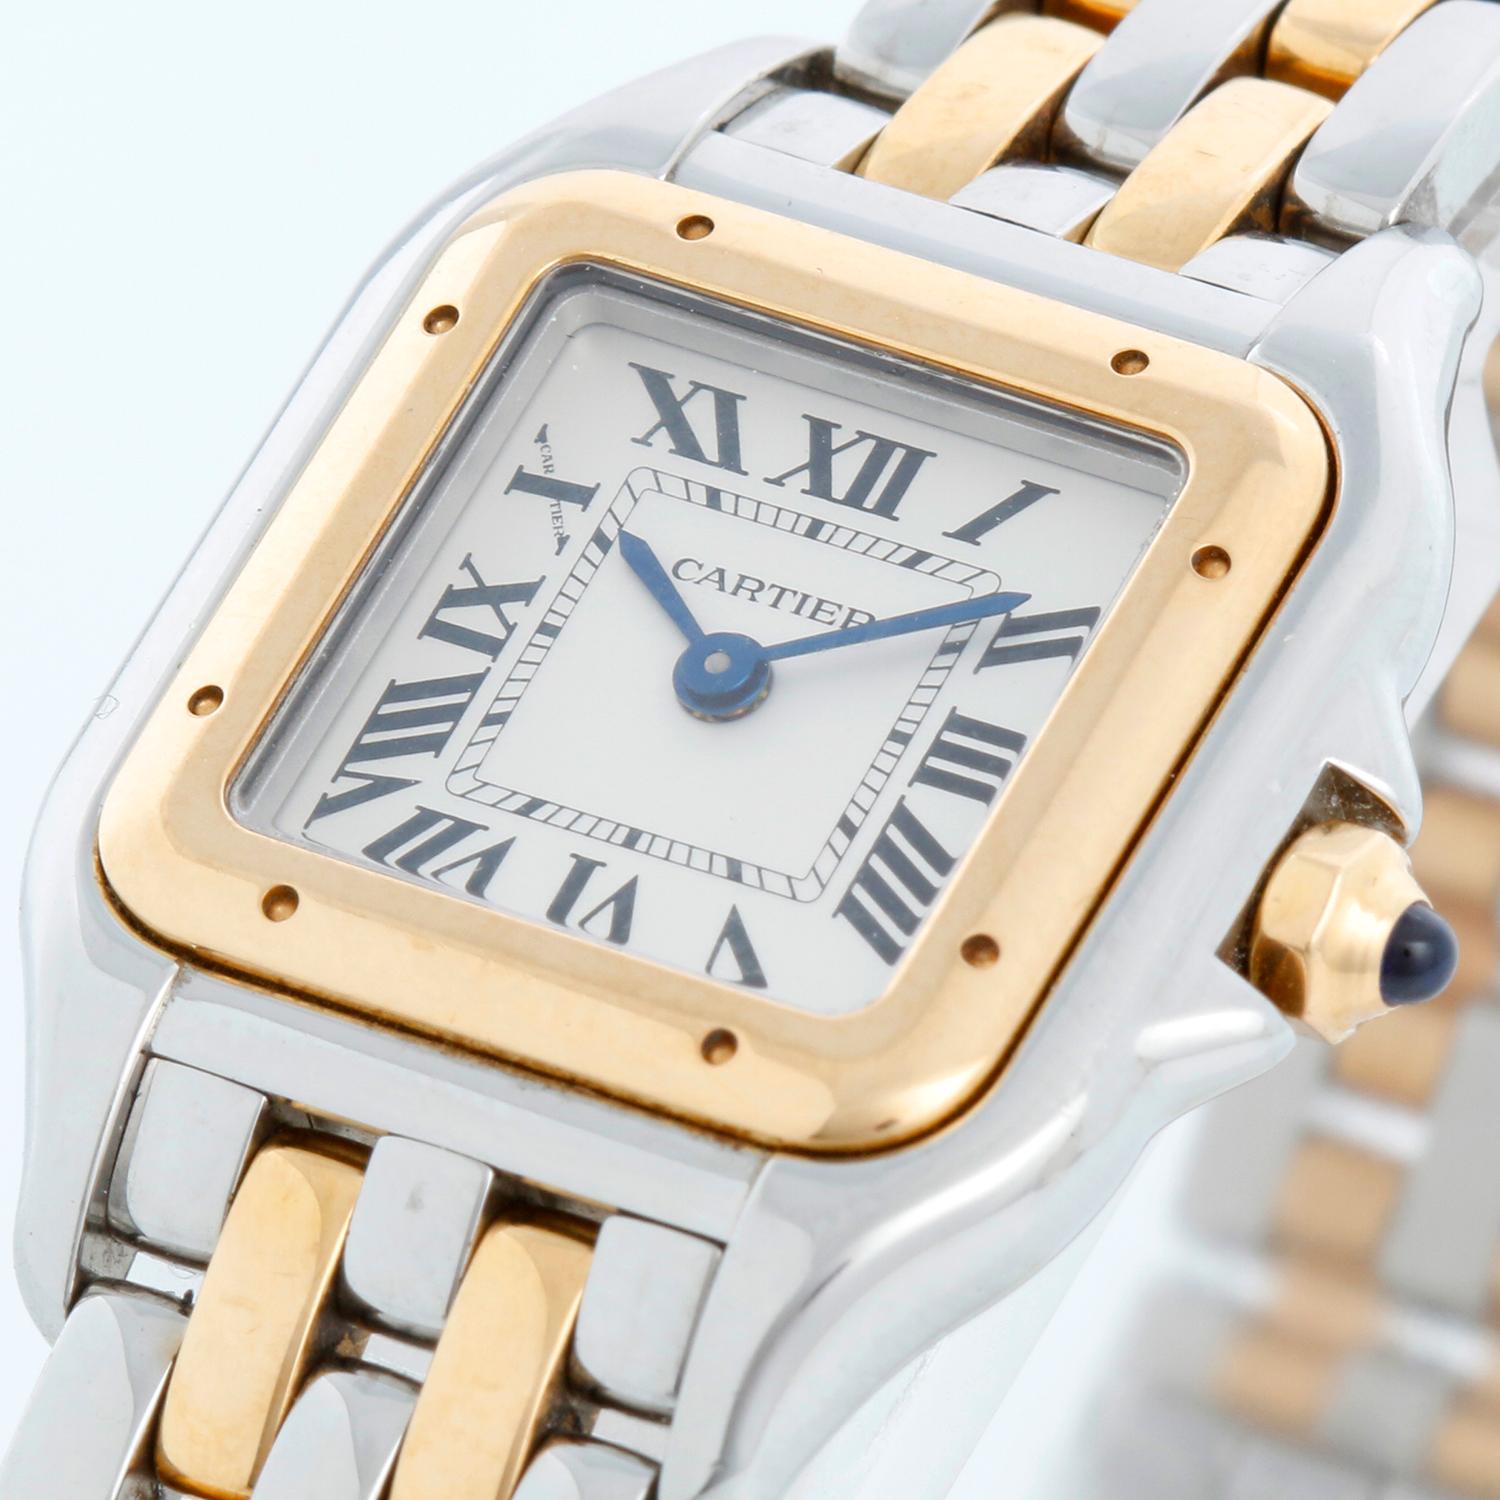 Cartier Panther Small 2-Tone Steel & Gold Panthere Watch 4023 W2PN0006 For Sale 1